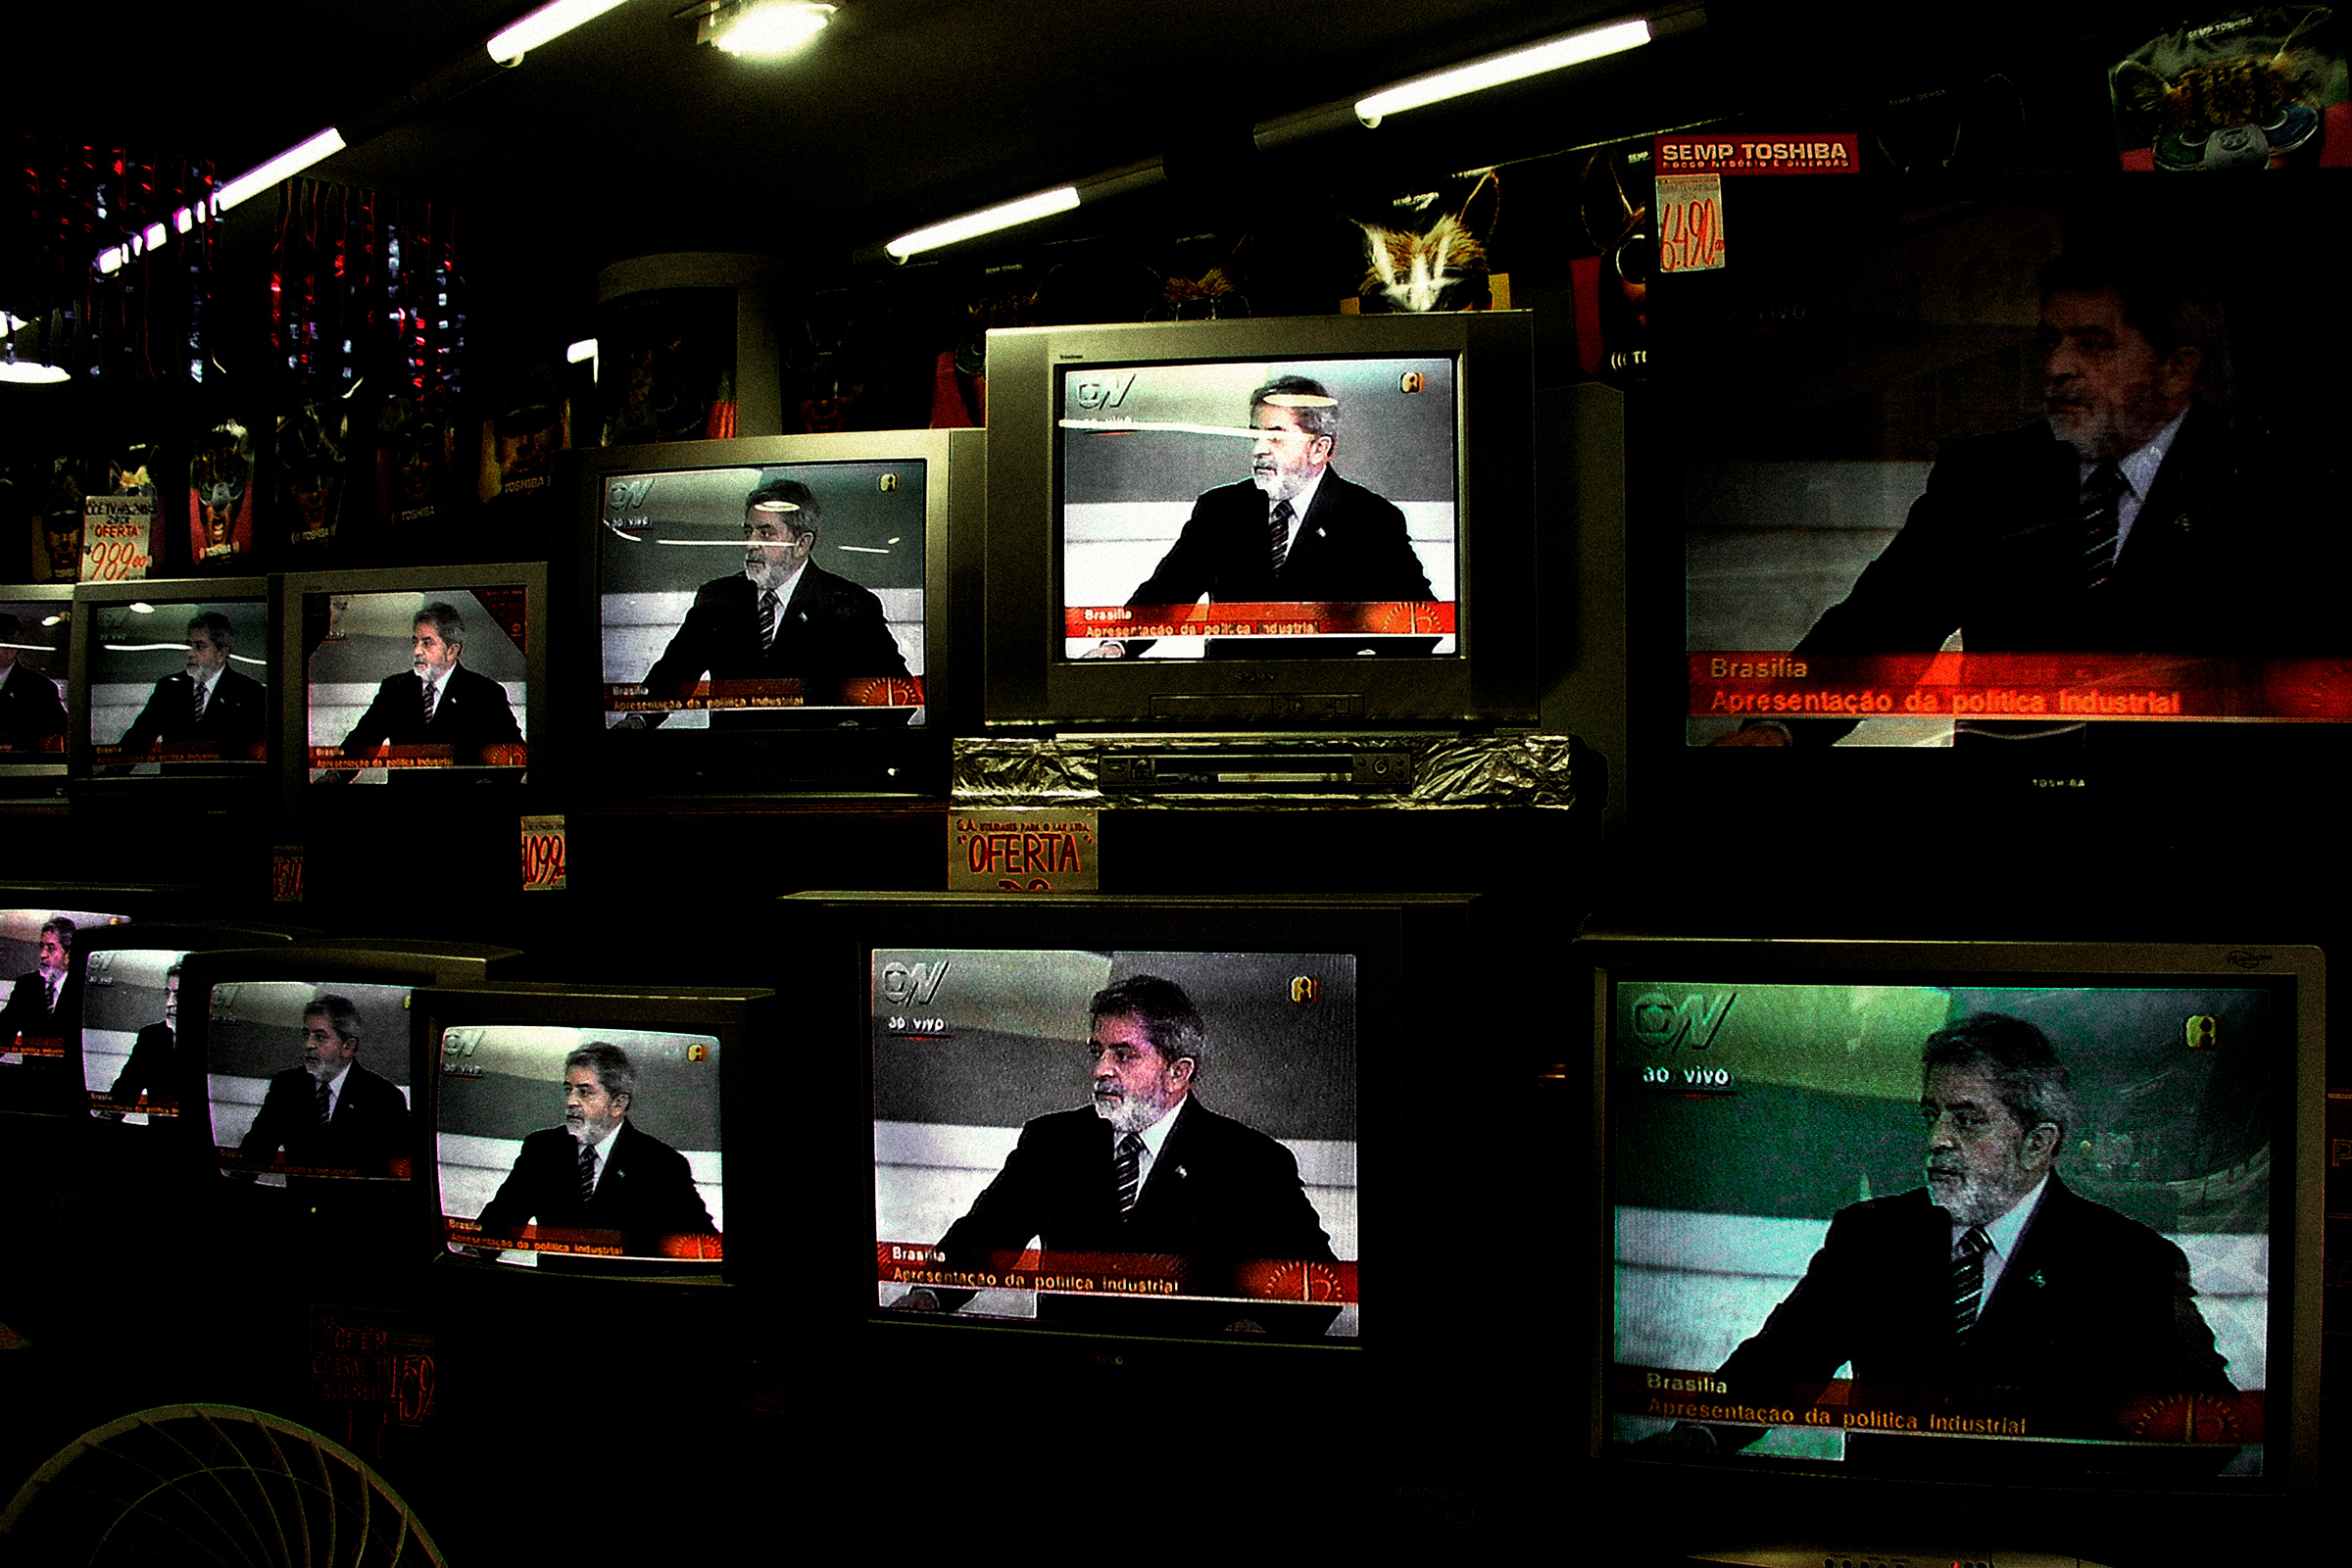 Inside a shop in São Paulo in 2004, Lula is seen on television giving a speech responding to accusations of corruption against his government. (Alex Majoli—Magnum Photos)